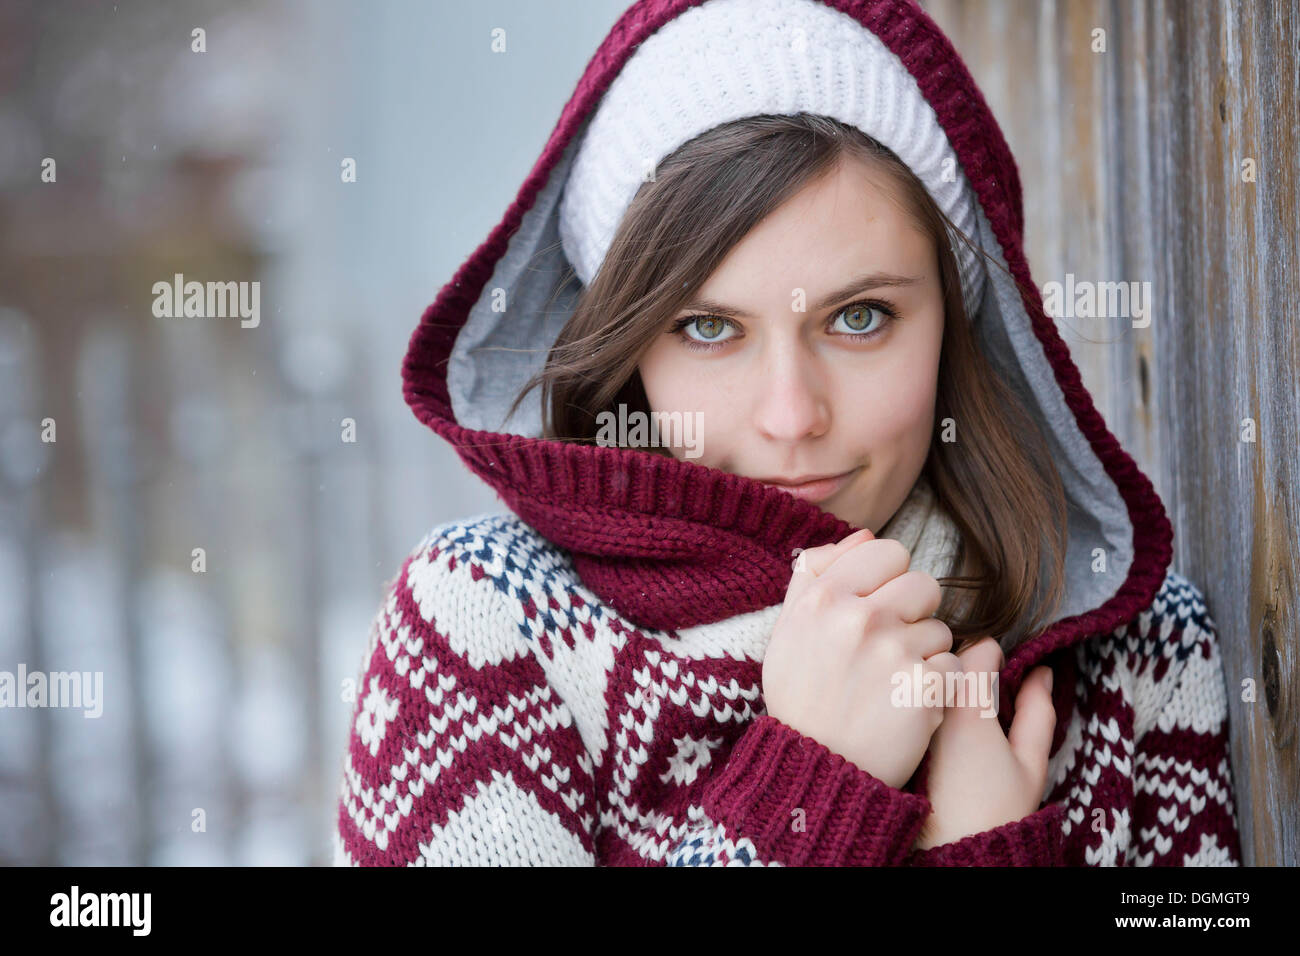 Young woman wearing a knitted sweater with a hood, portrait, Germany Stock Photo